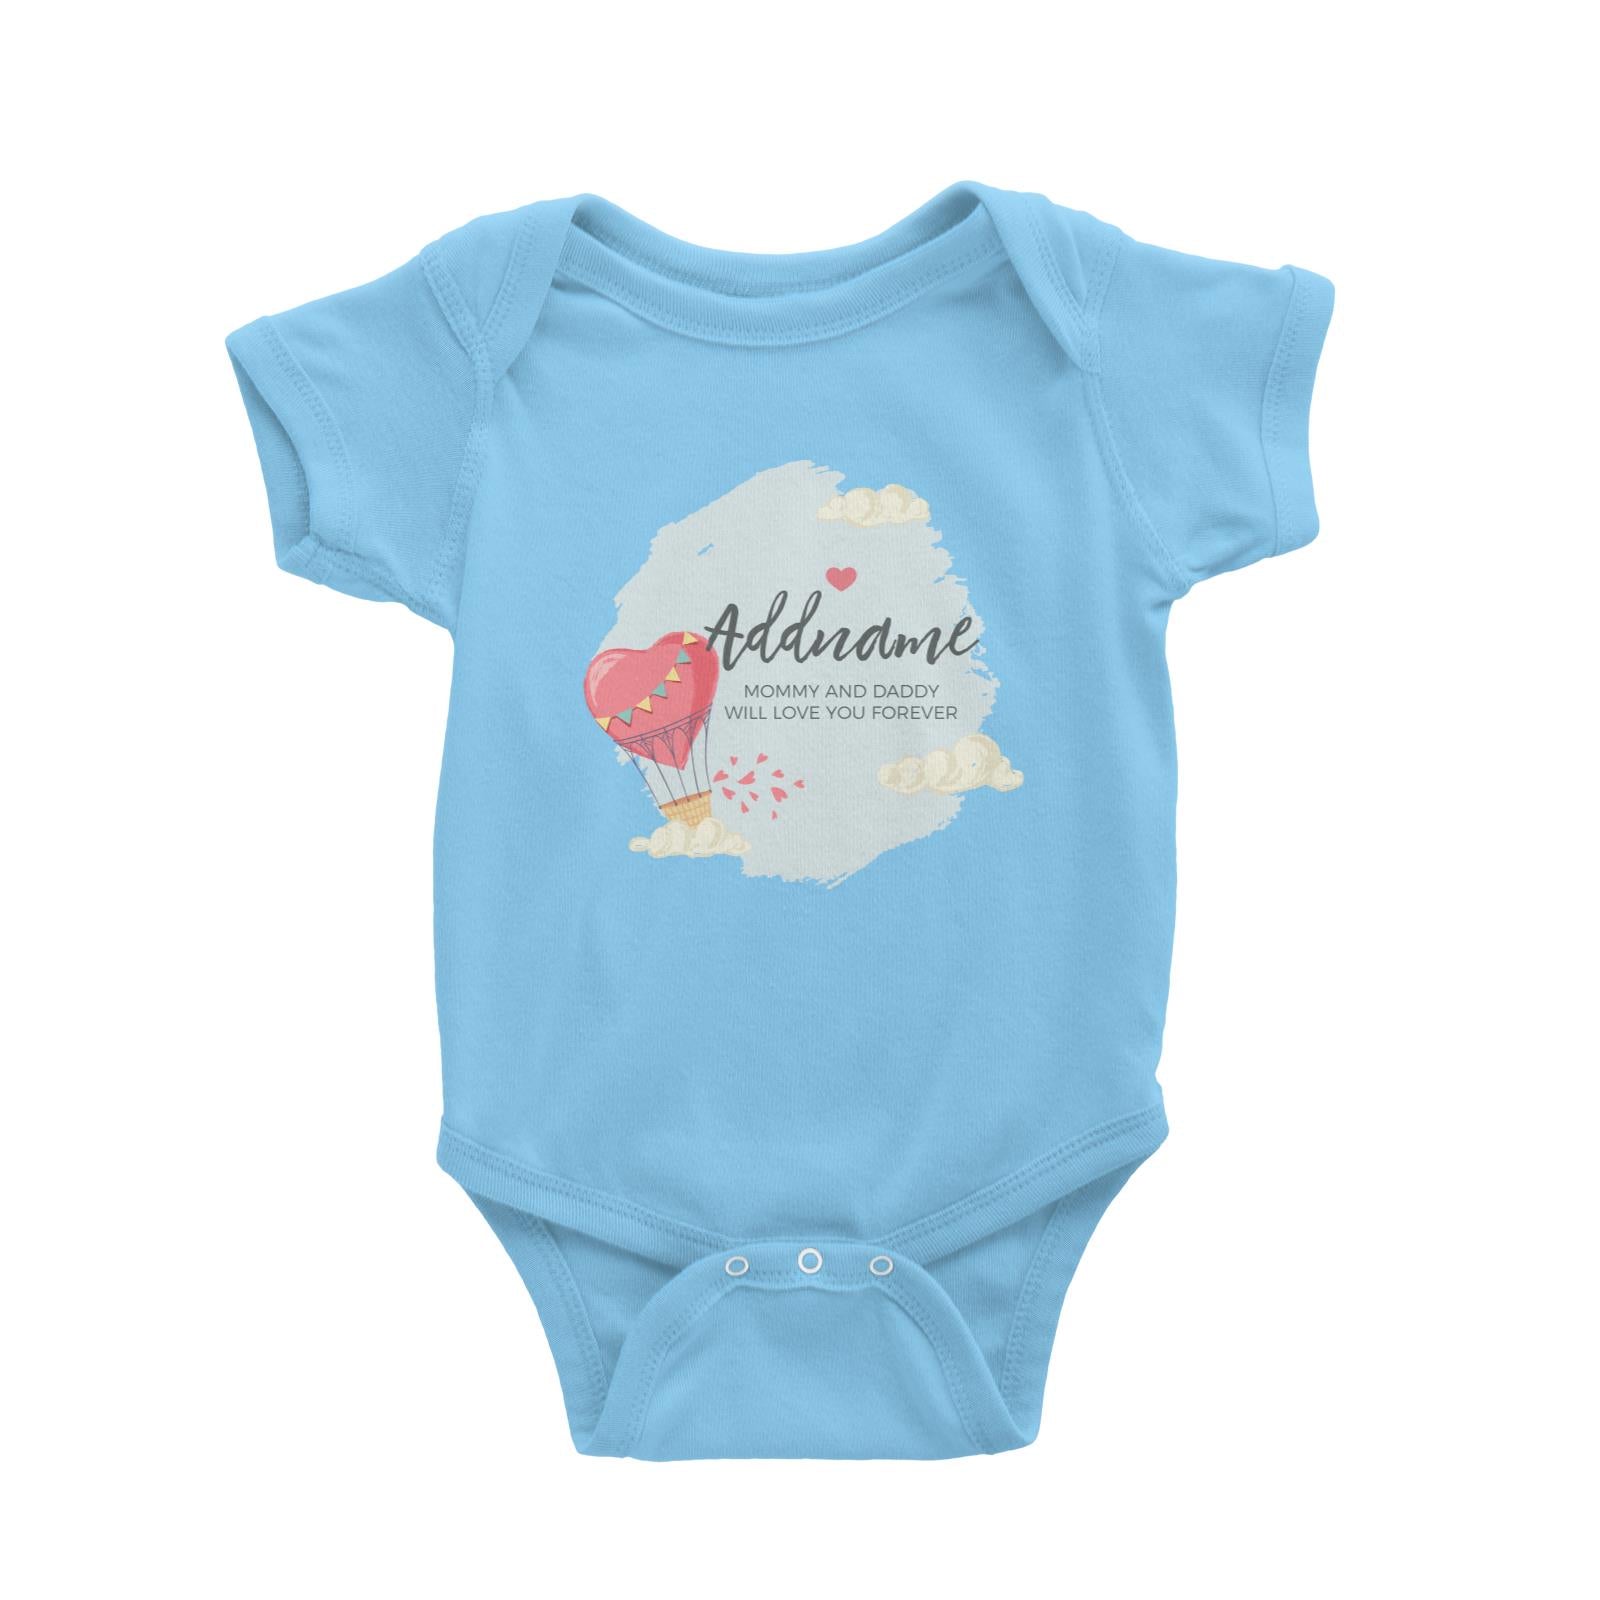 Heart Shaped Hot Air Balloon with Hearts and Clouds Personalizable with Name and Text Baby Romper